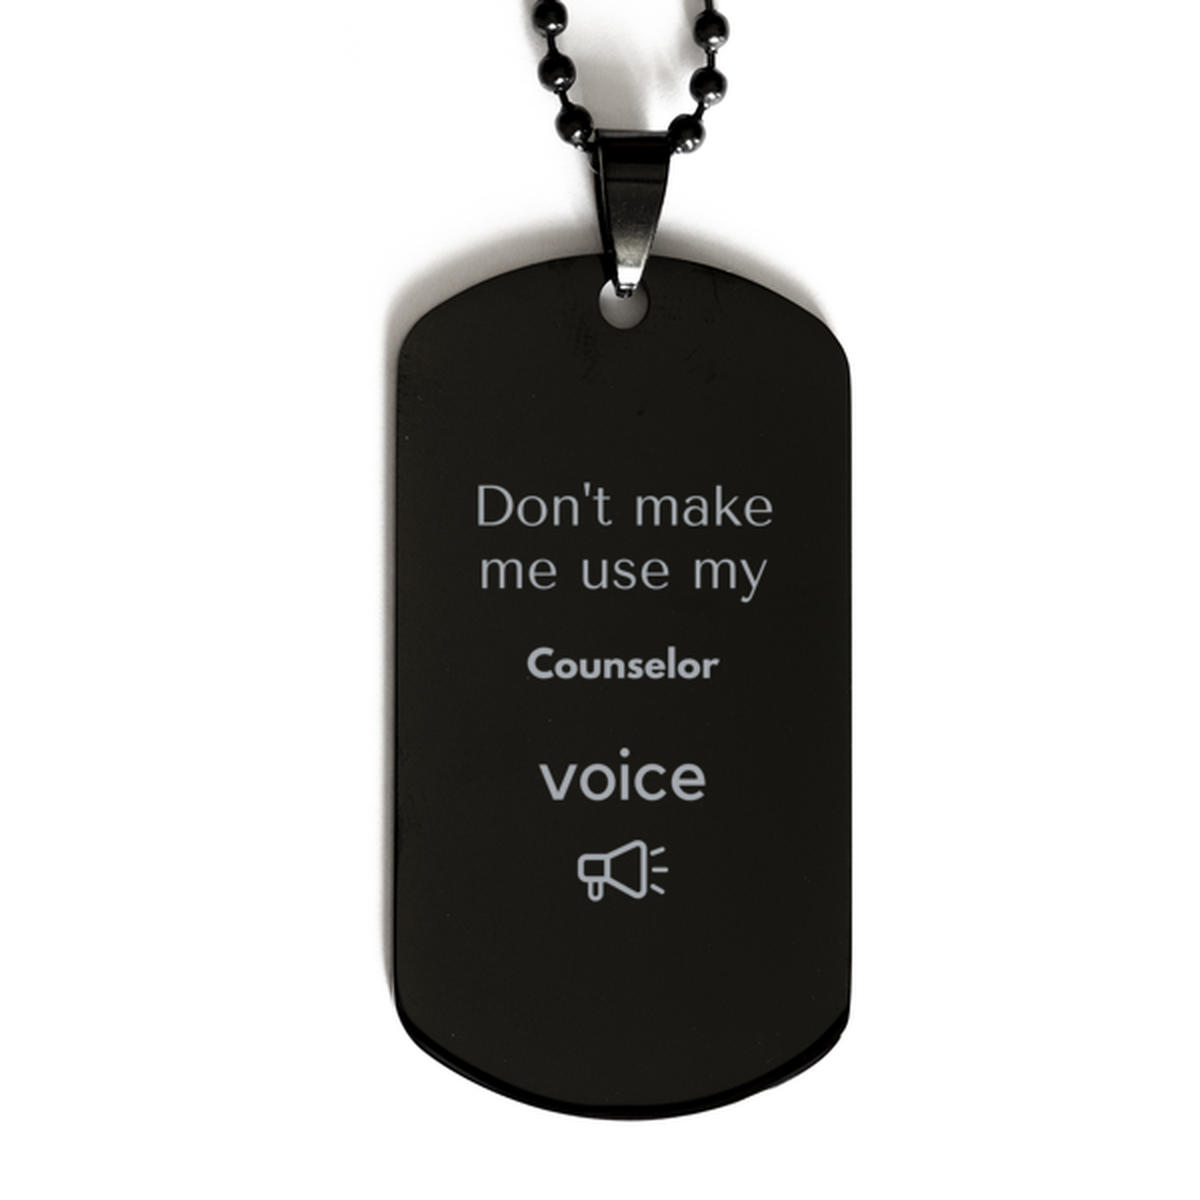 Don't make me use my Counselor voice, Sarcasm Counselor Gifts, Christmas Counselor Black Dog Tag Birthday Unique Gifts For Counselor Coworkers, Men, Women, Colleague, Friends